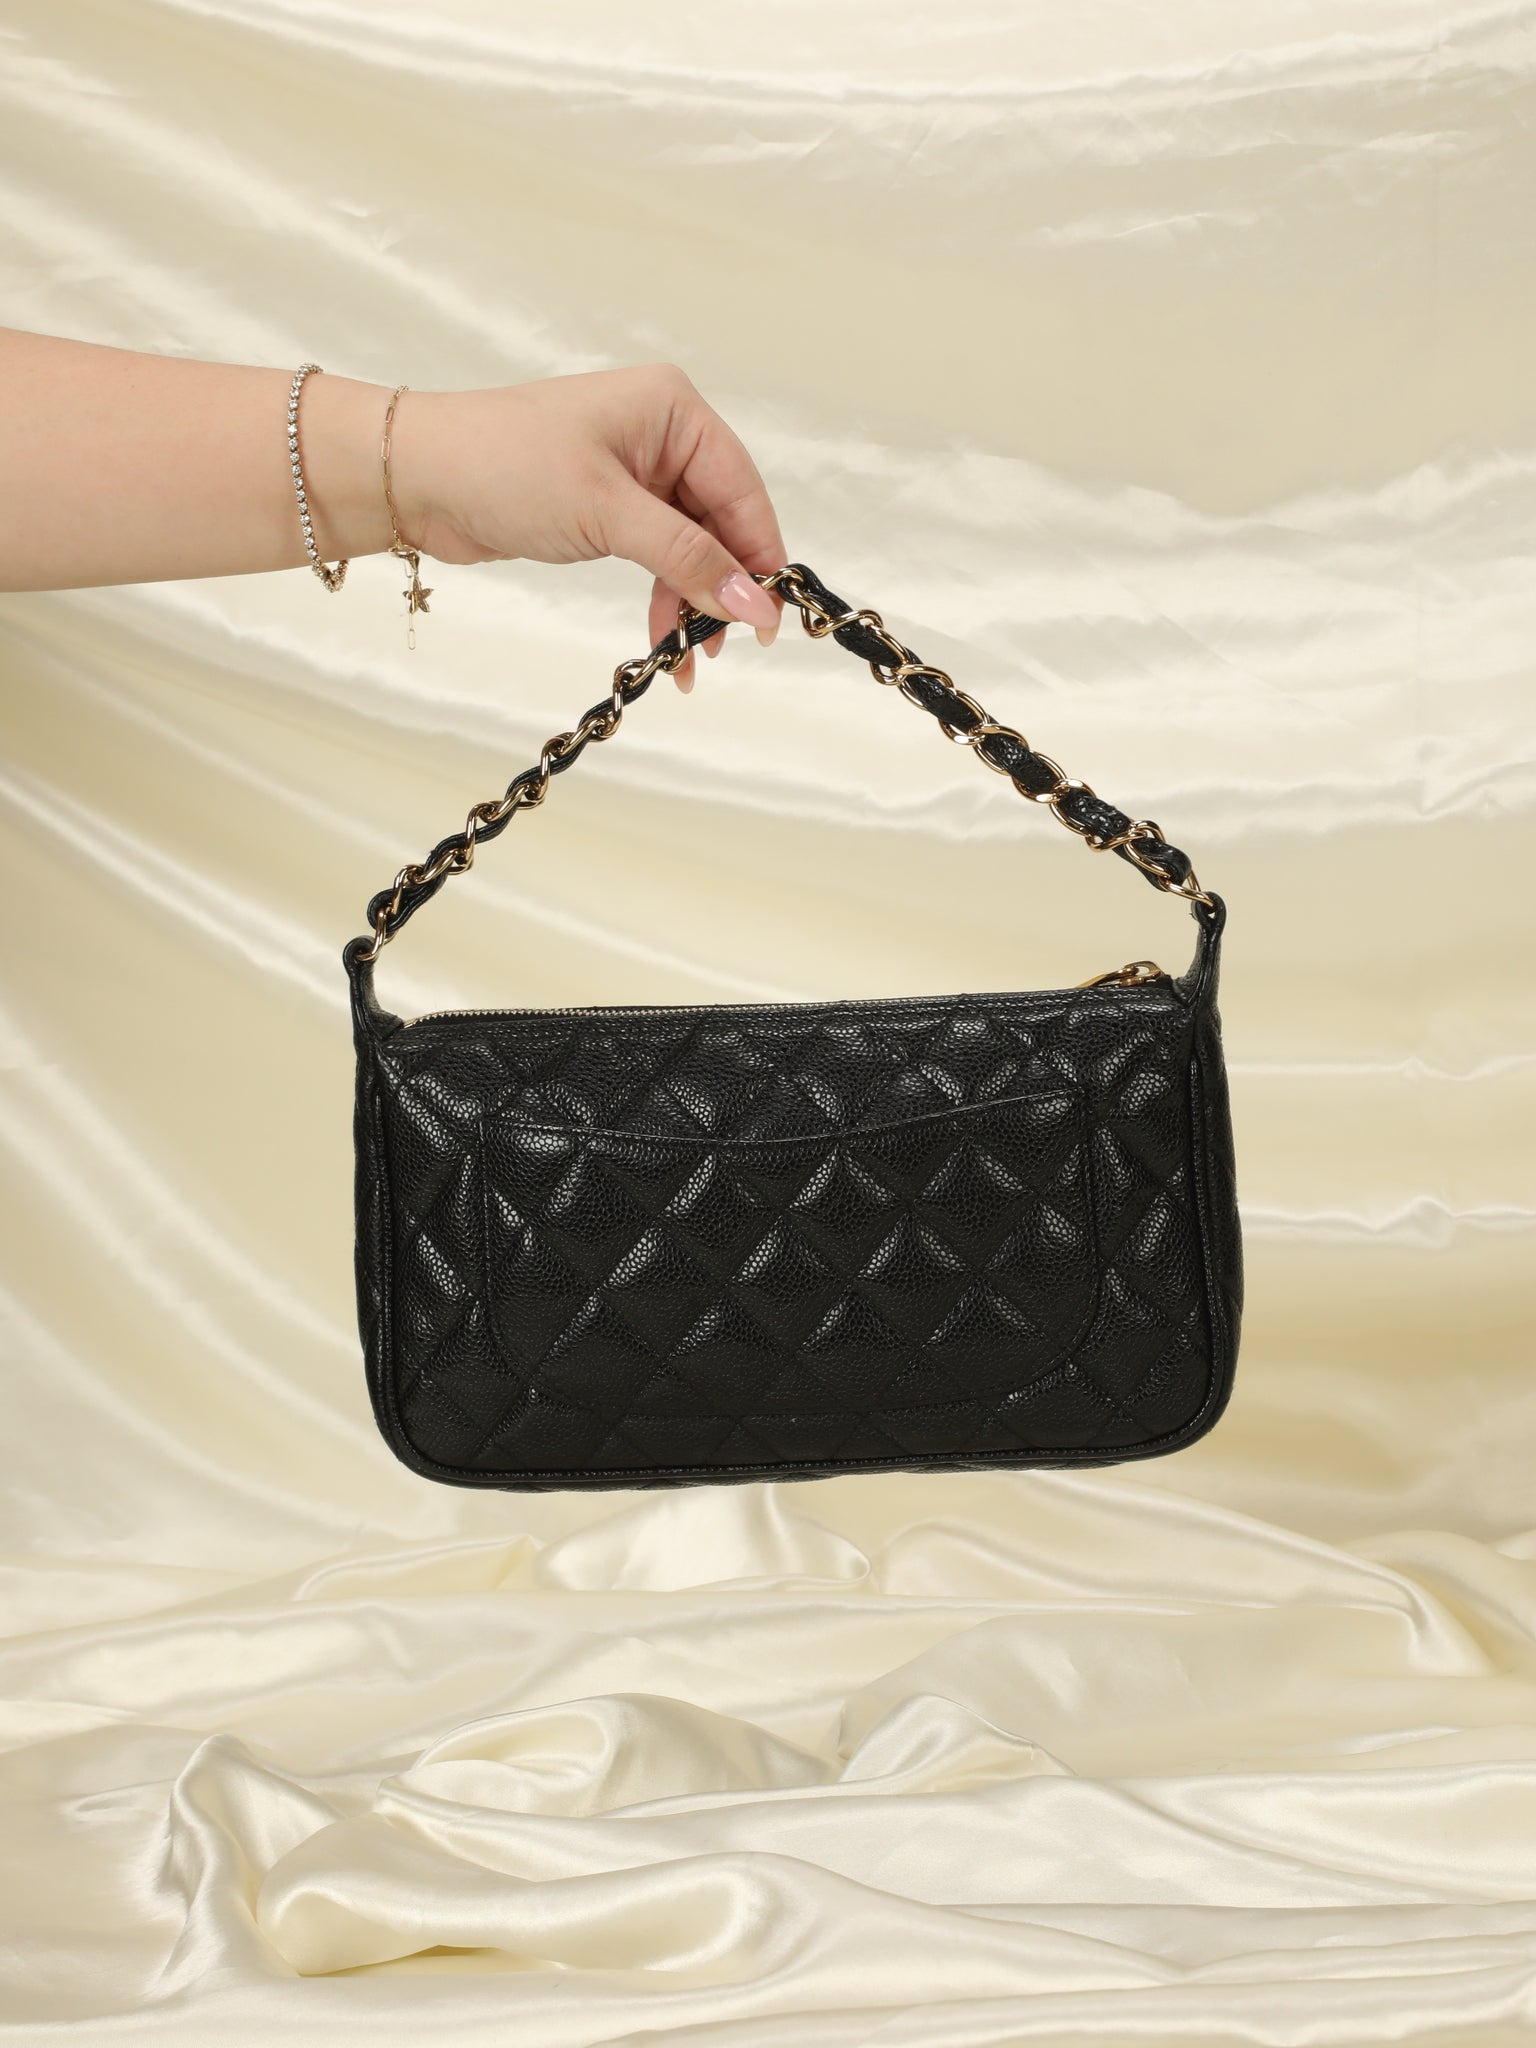 Extremely Rare Chanel Patent All Black Flap Bag – SFN